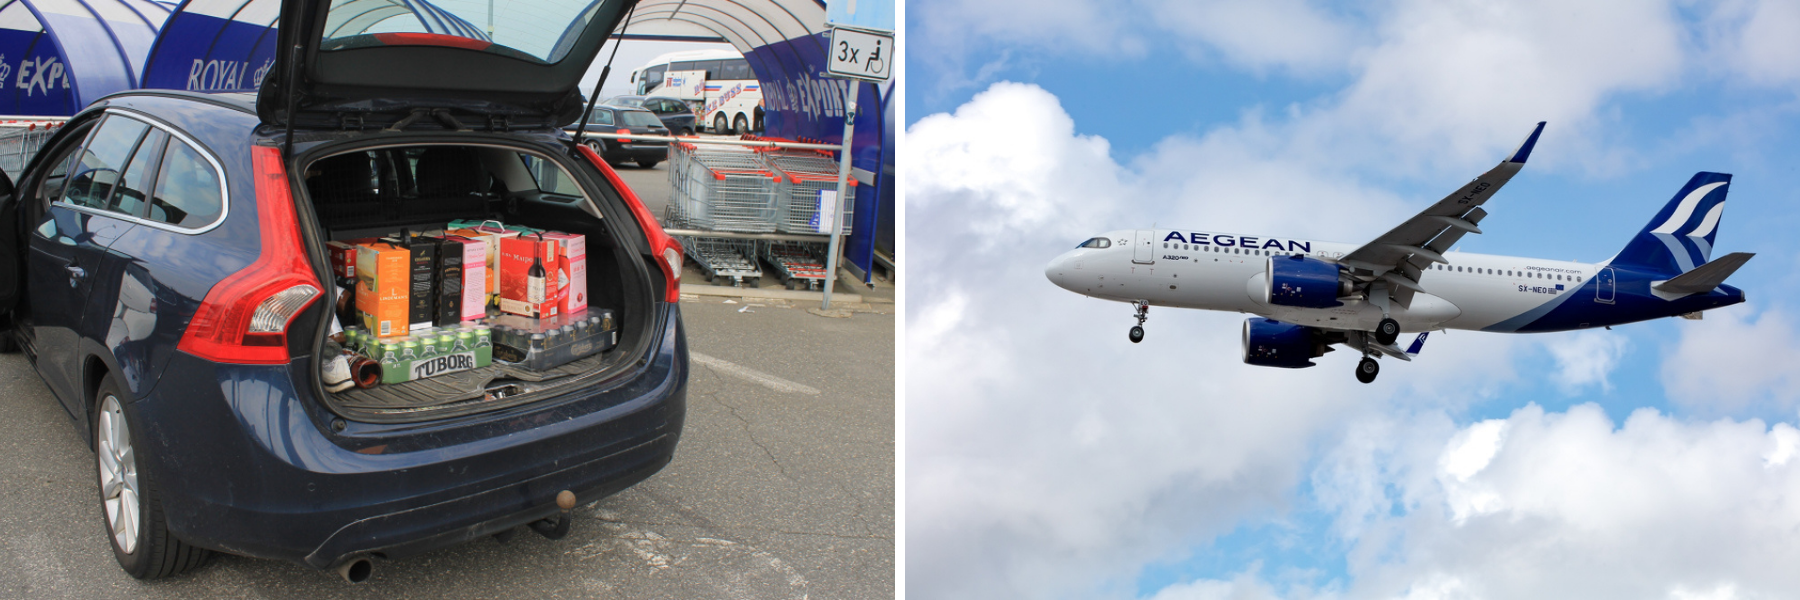 Transport options: by car to Croatia, by air to Greece.